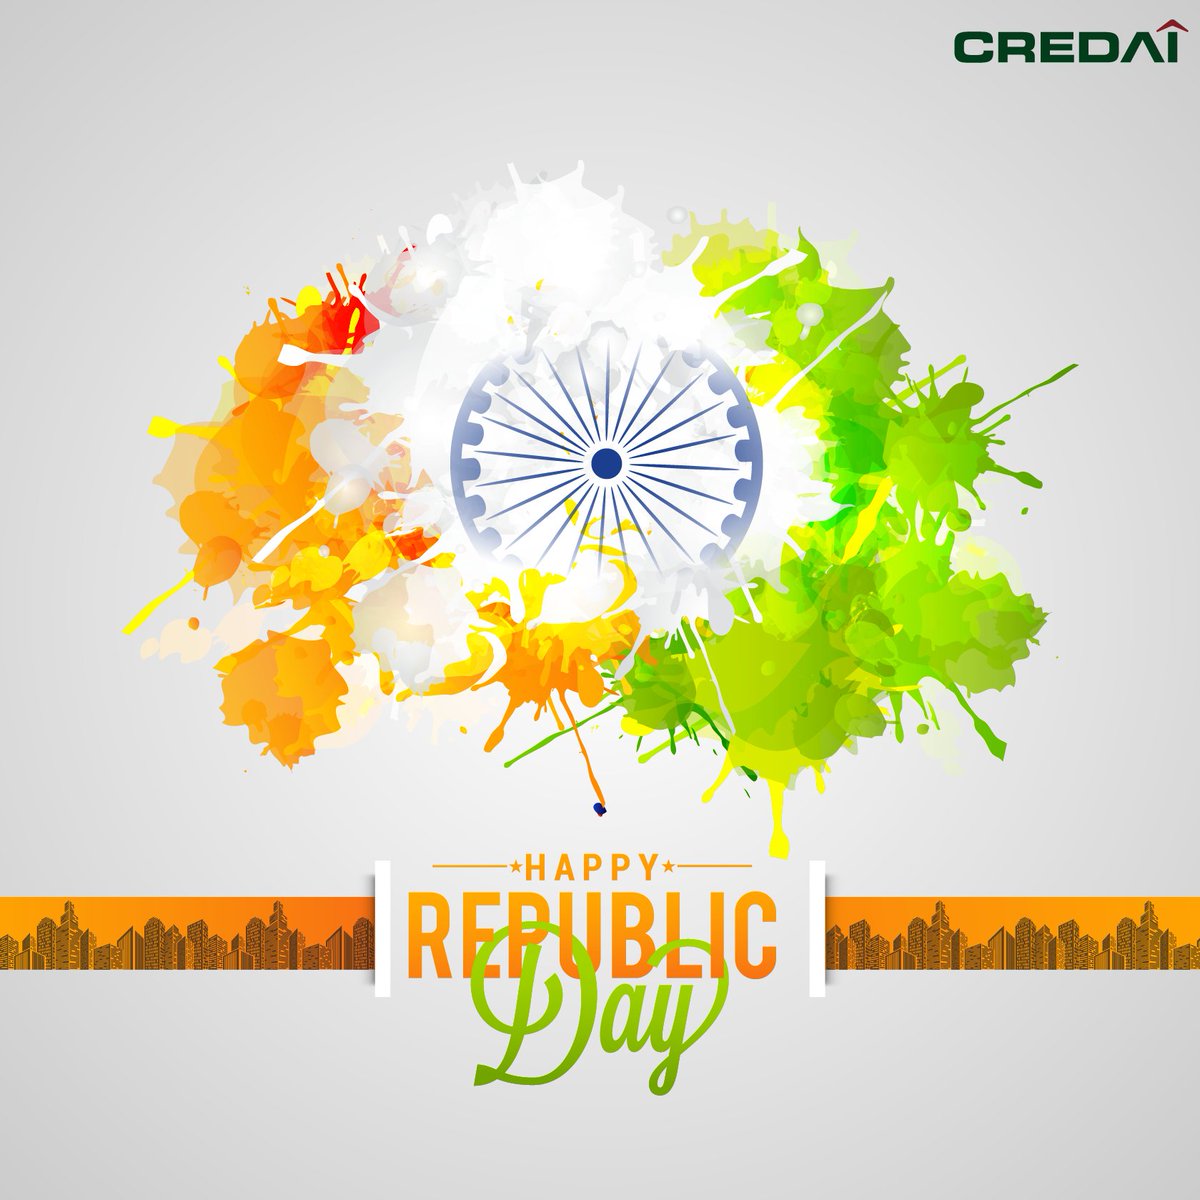 RT @CREDAINational: On this 69th #RepublicDay, let's celebrate peace, unity and harmony. #HappyRepublicDay https://t.co/UUIHMD6Tqu